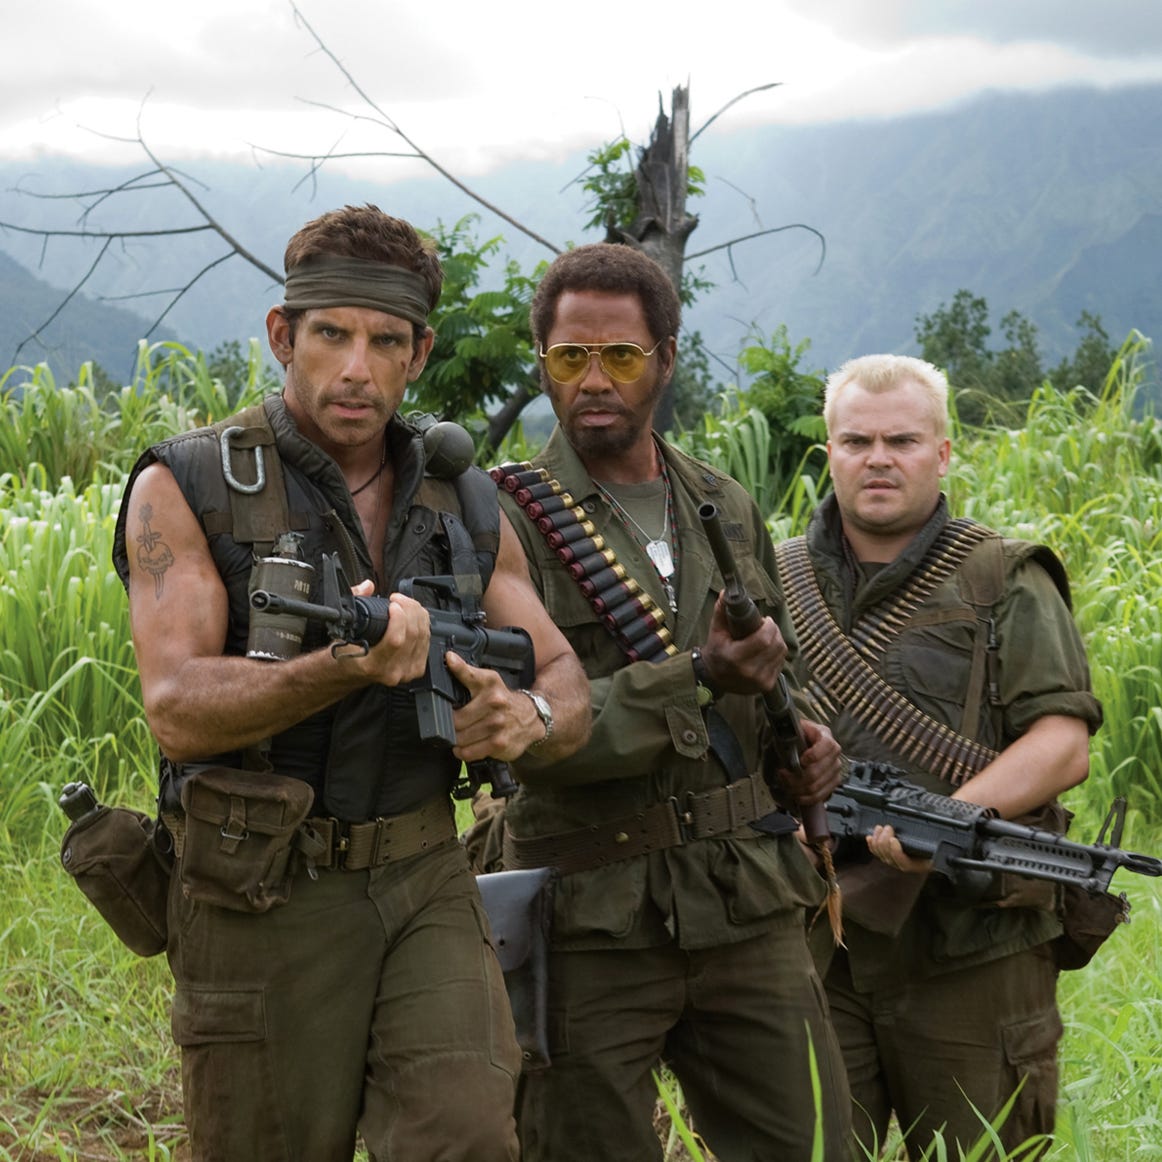 In 2007 Stiller produced, wrote, directed and starred in the summer comedy "Tropic Thunder" with Robert Downey, Jr. (center) and Jack Black (r).